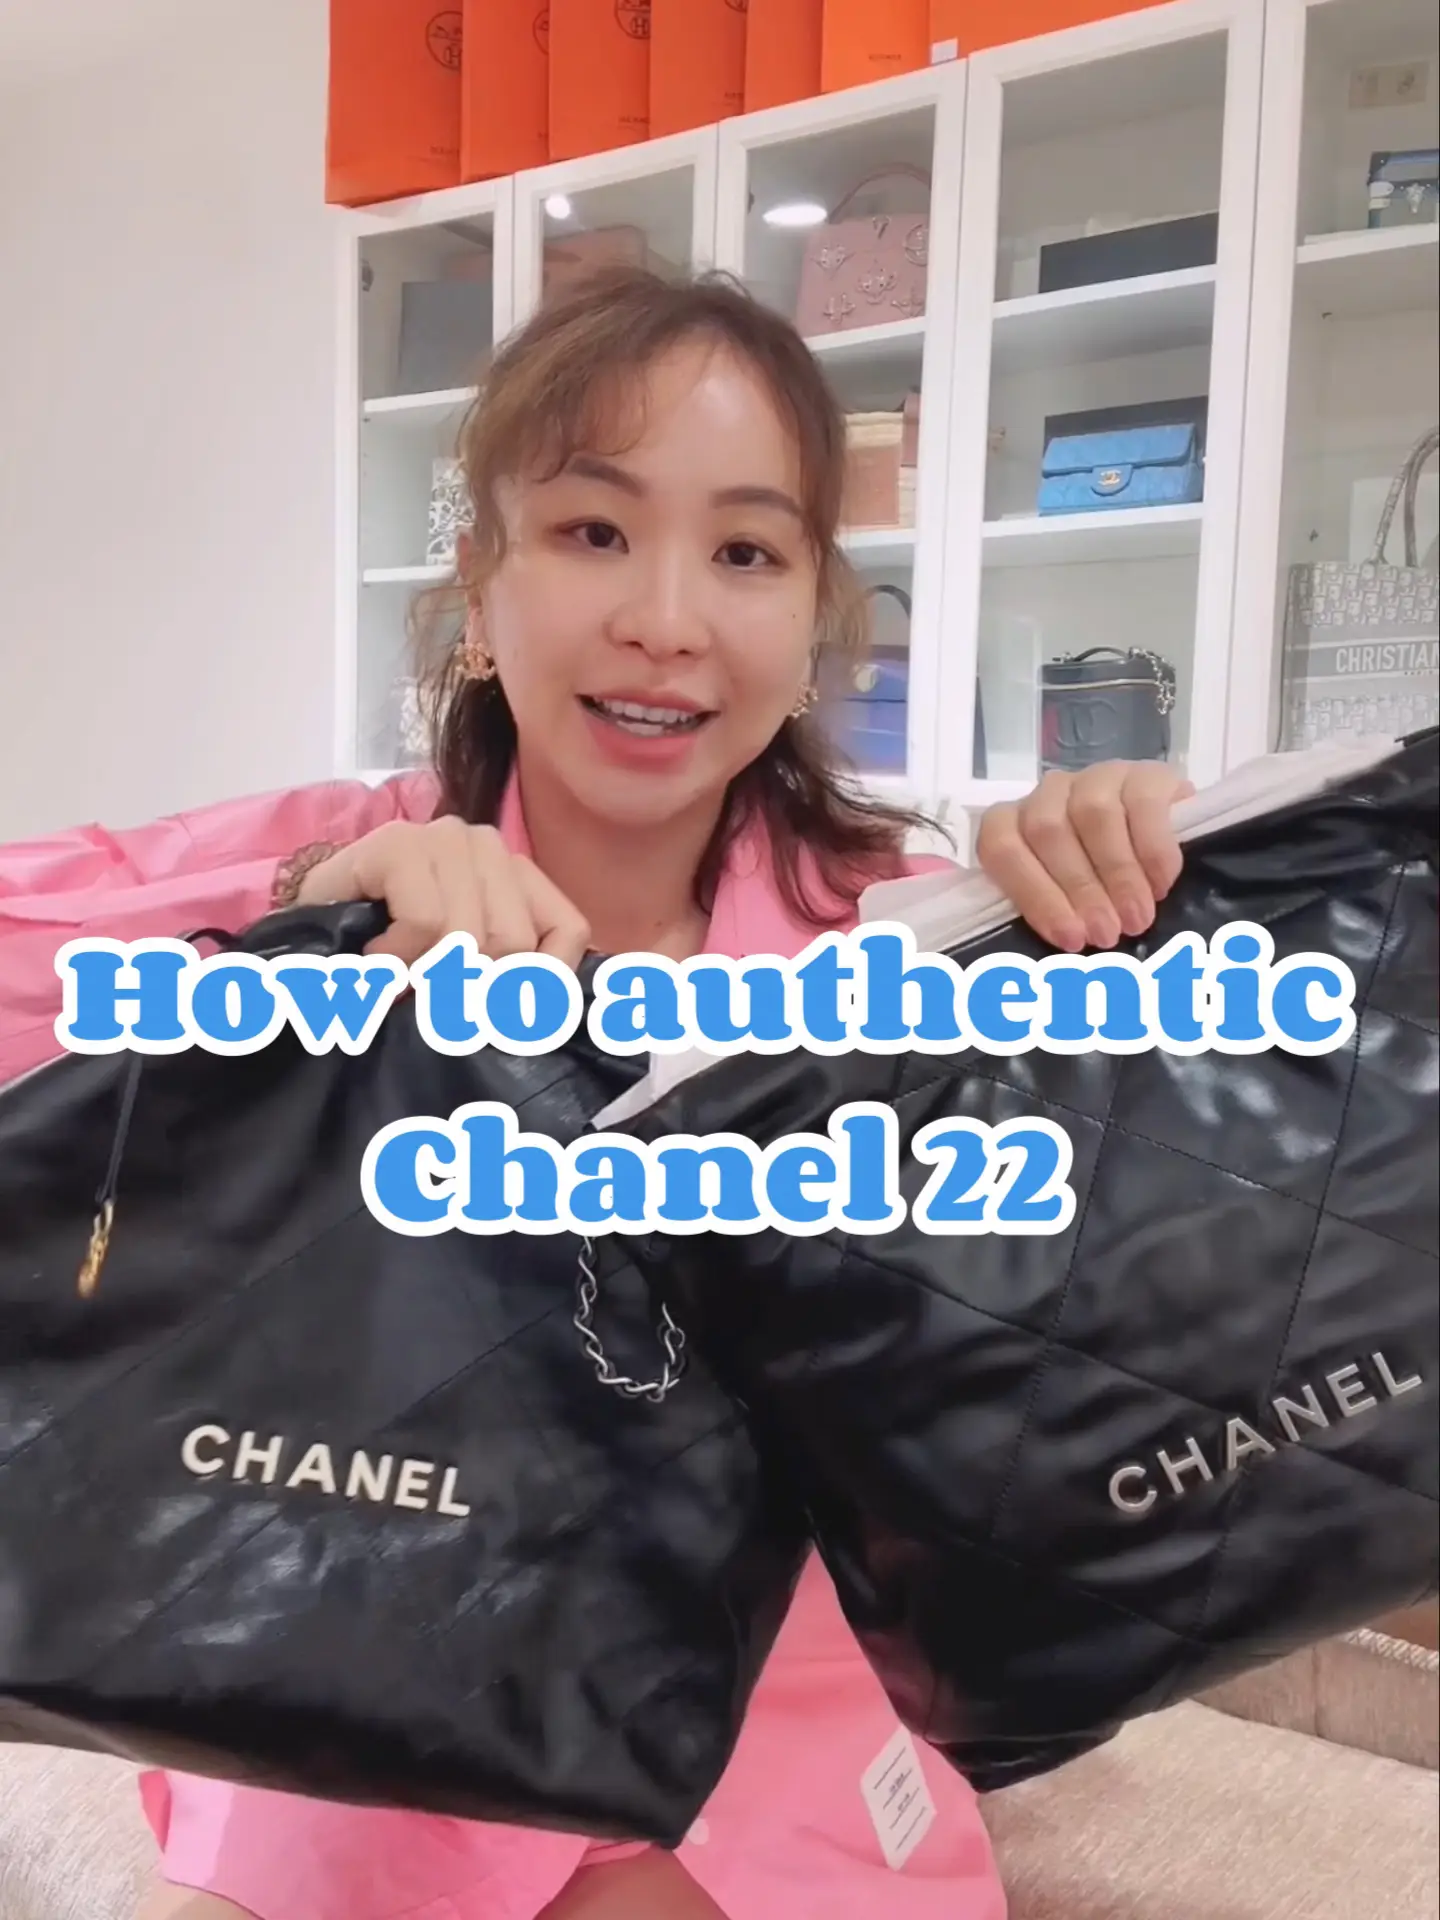 How to identify the authentic Chanel 22 bag?, Video published by  DLuxuryParadise